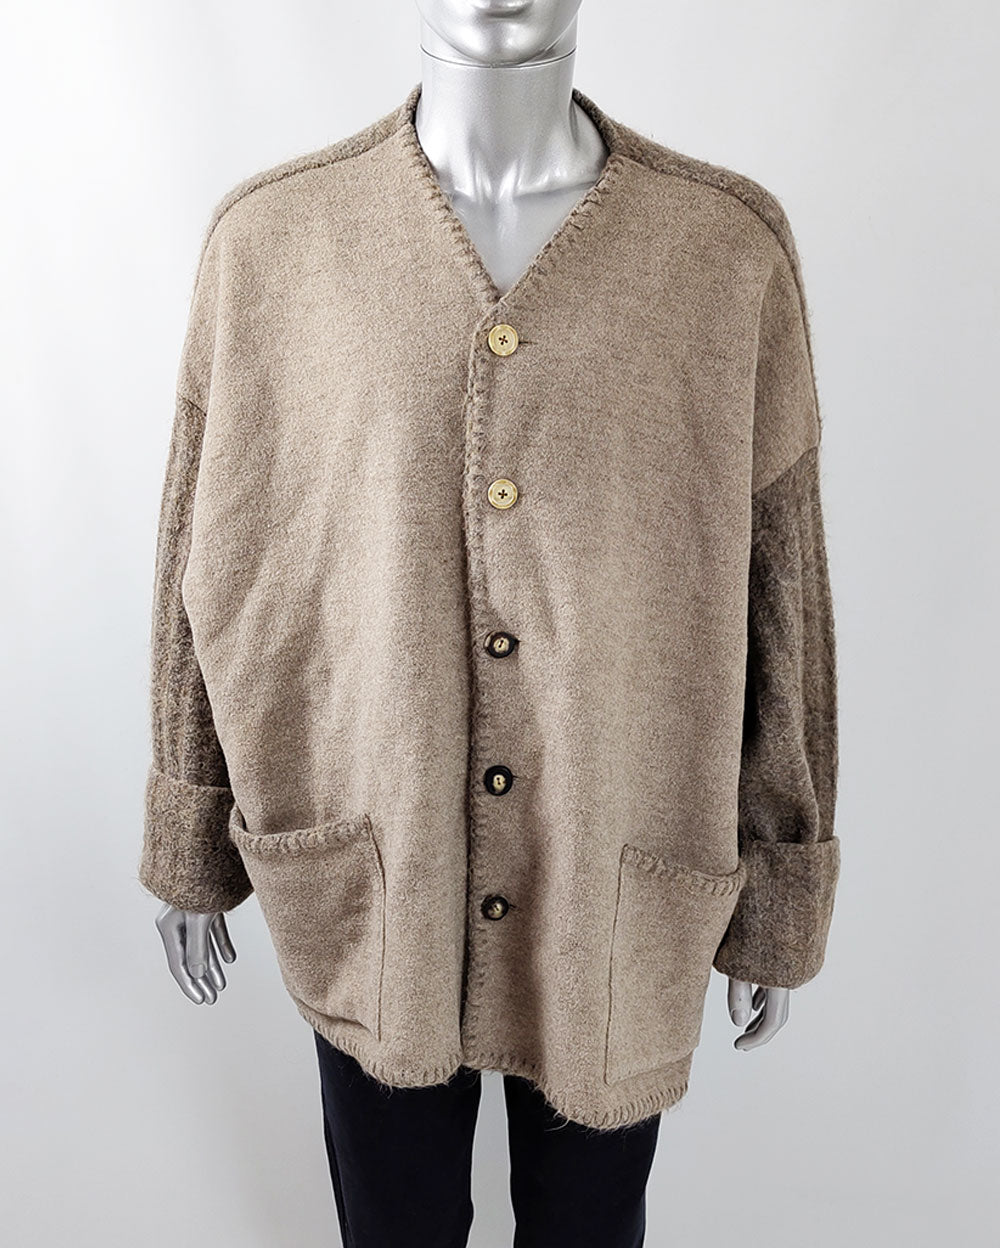 A vintage mens Dolce & Gabbana wool and mohair cardigan jacket from the 90s.